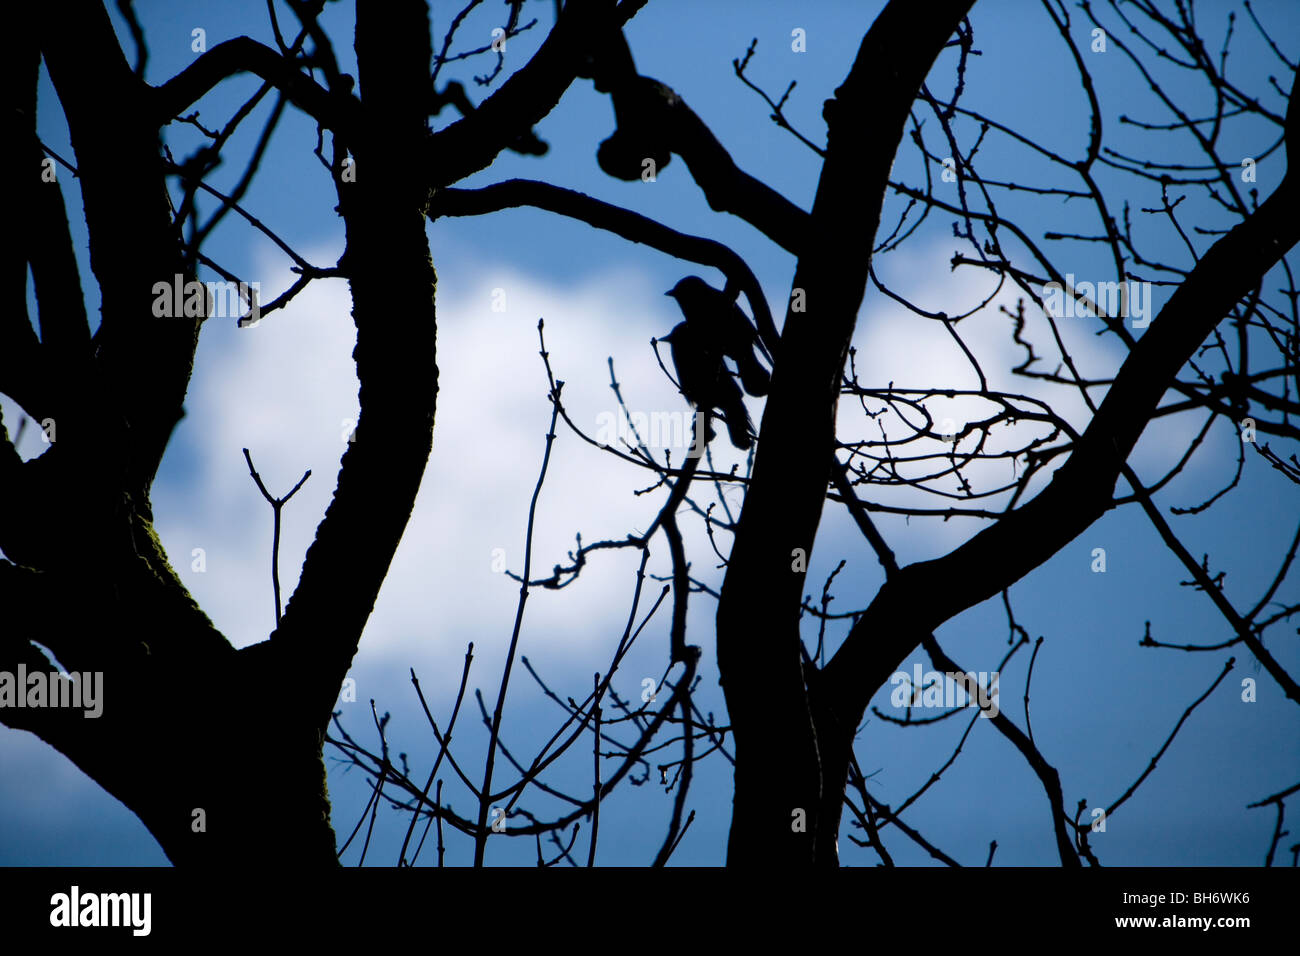 Crow in trees silhouette Pembrokeshire, Wales Stock Photo